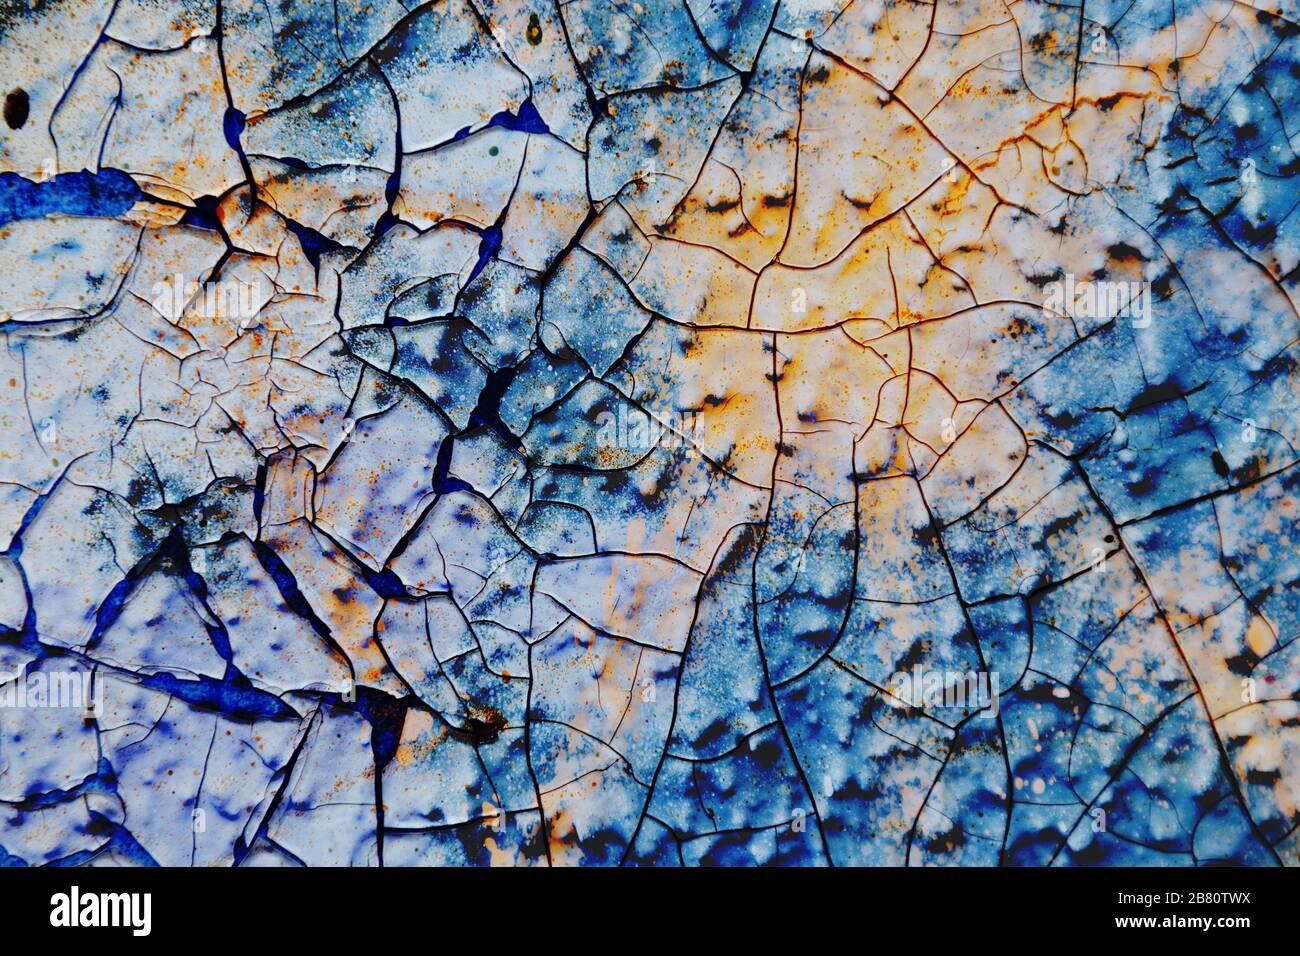 Surface texture with blue and yellow color on a surface structure with thick paint application and with cracks. For abstract backgrounds. Germany Stock Photo